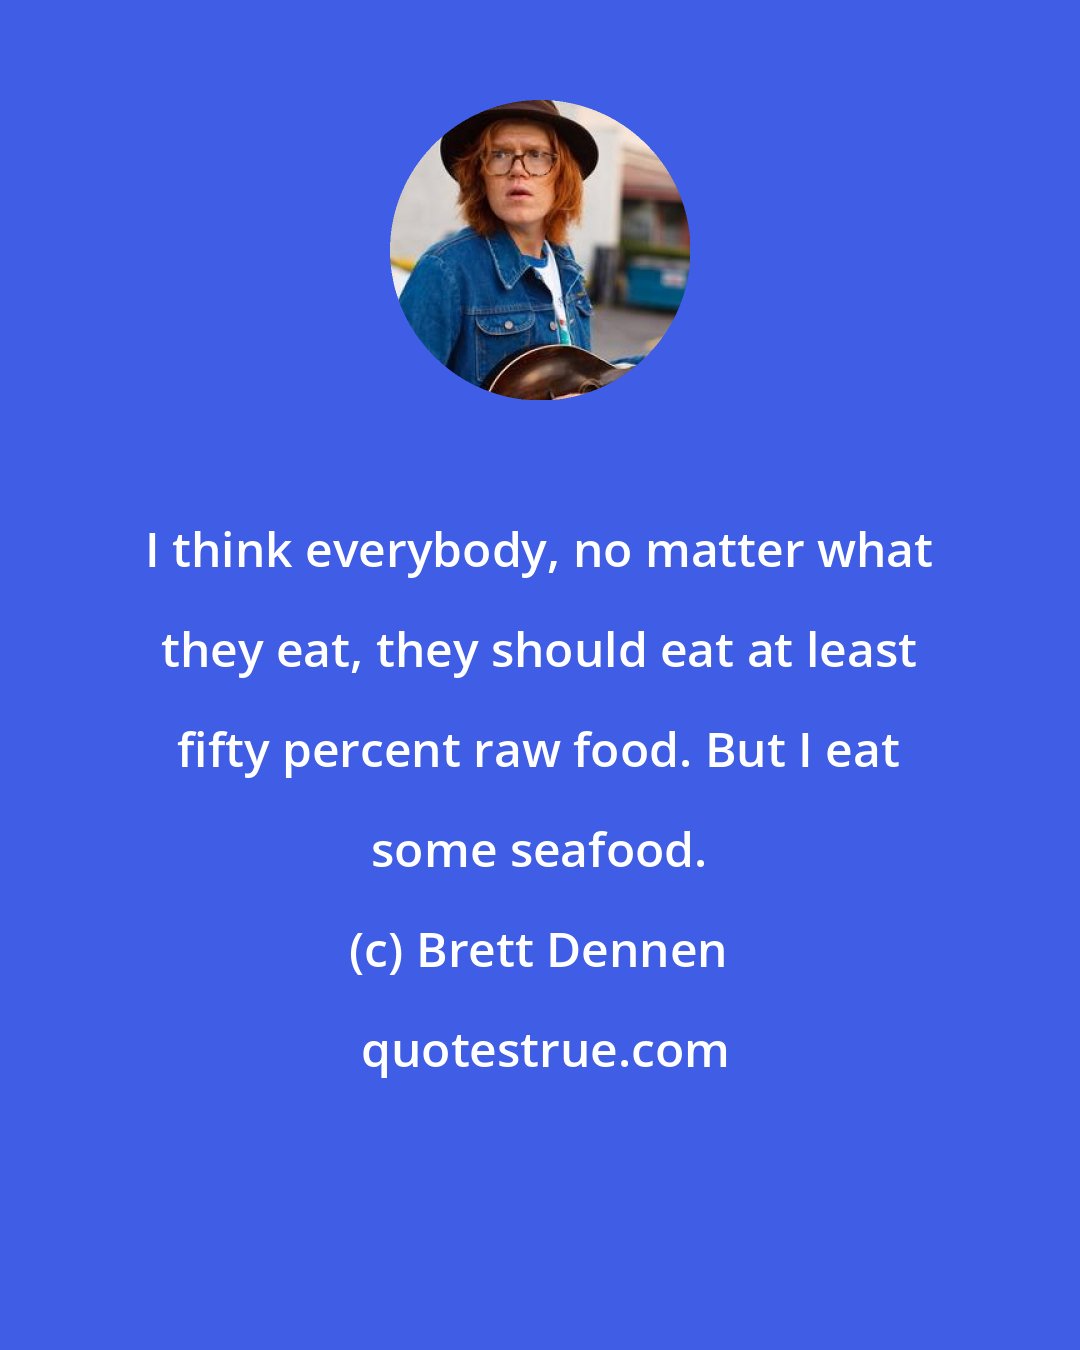 Brett Dennen: I think everybody, no matter what they eat, they should eat at least fifty percent raw food. But I eat some seafood.